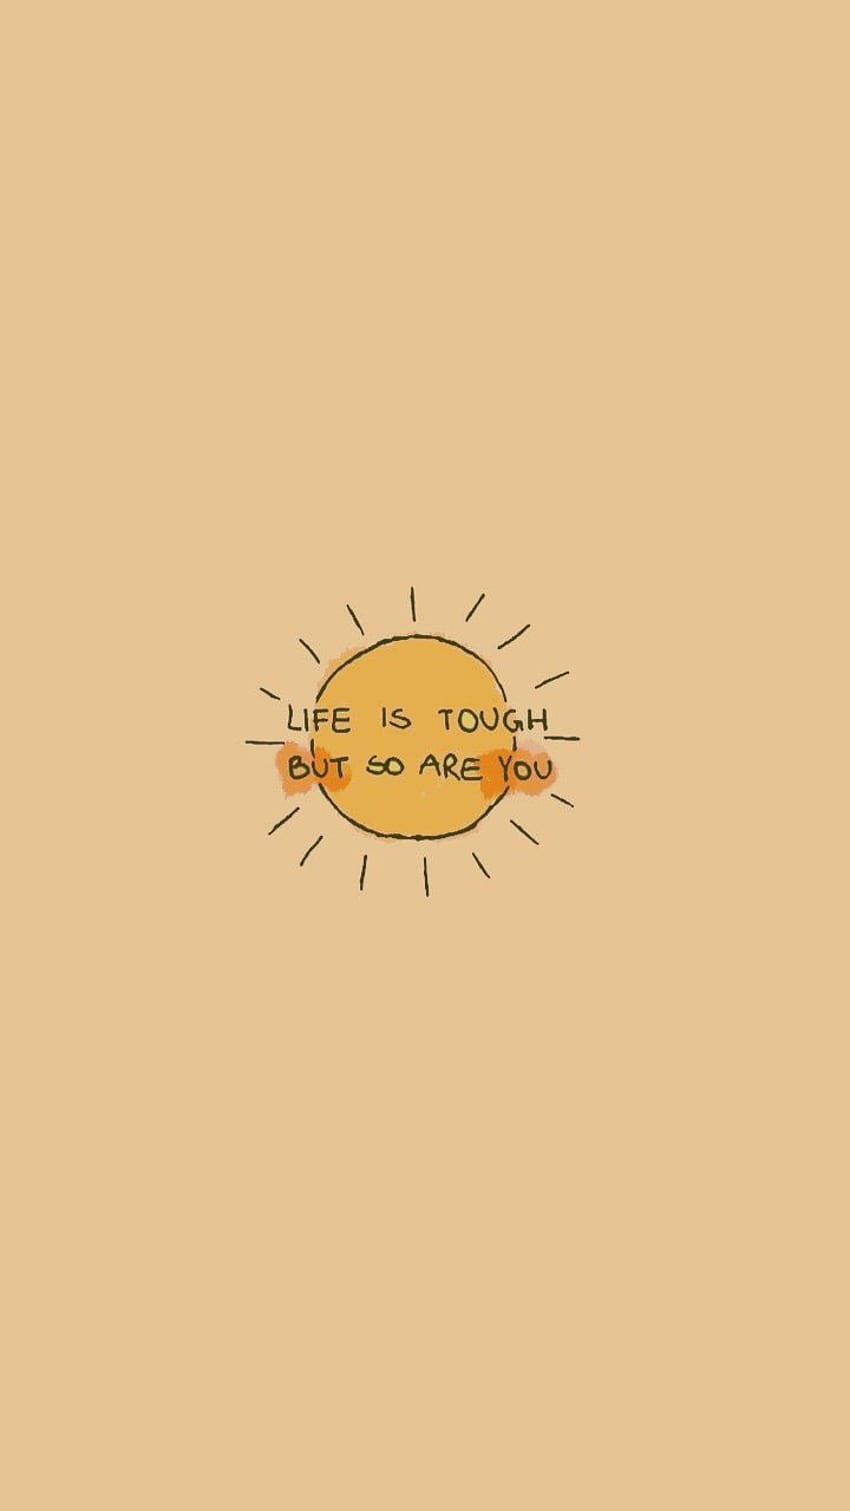 Download Life's Tough Motivational Quotes Aesthetic Wallpaper | Wallpapers .com